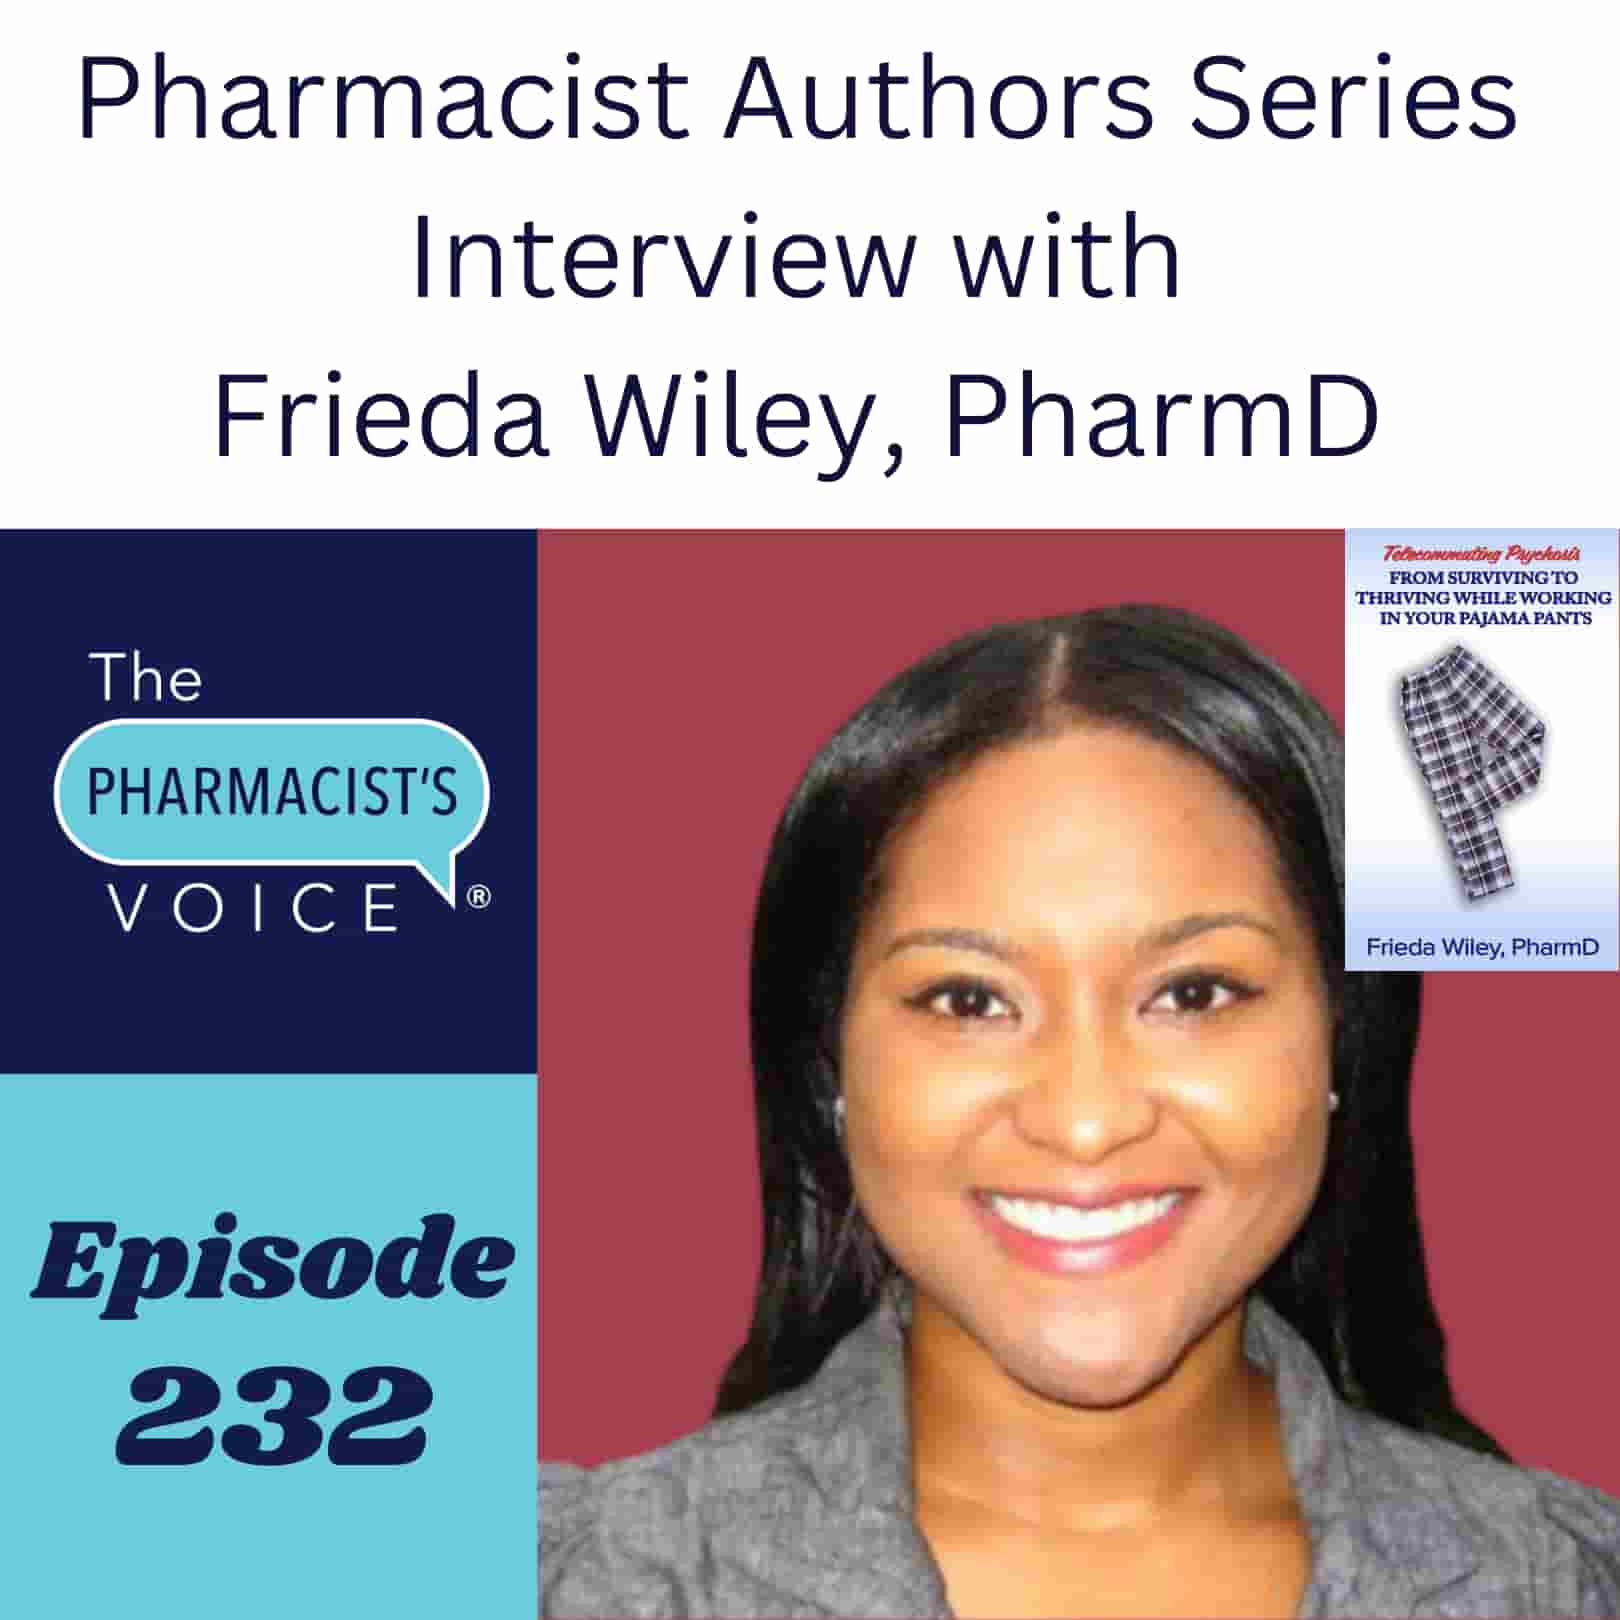 Pharmacist Authors Series. Interview with Frieda Wiley, PharmD. The Pharmacist's Voice Podcast Episode 232.